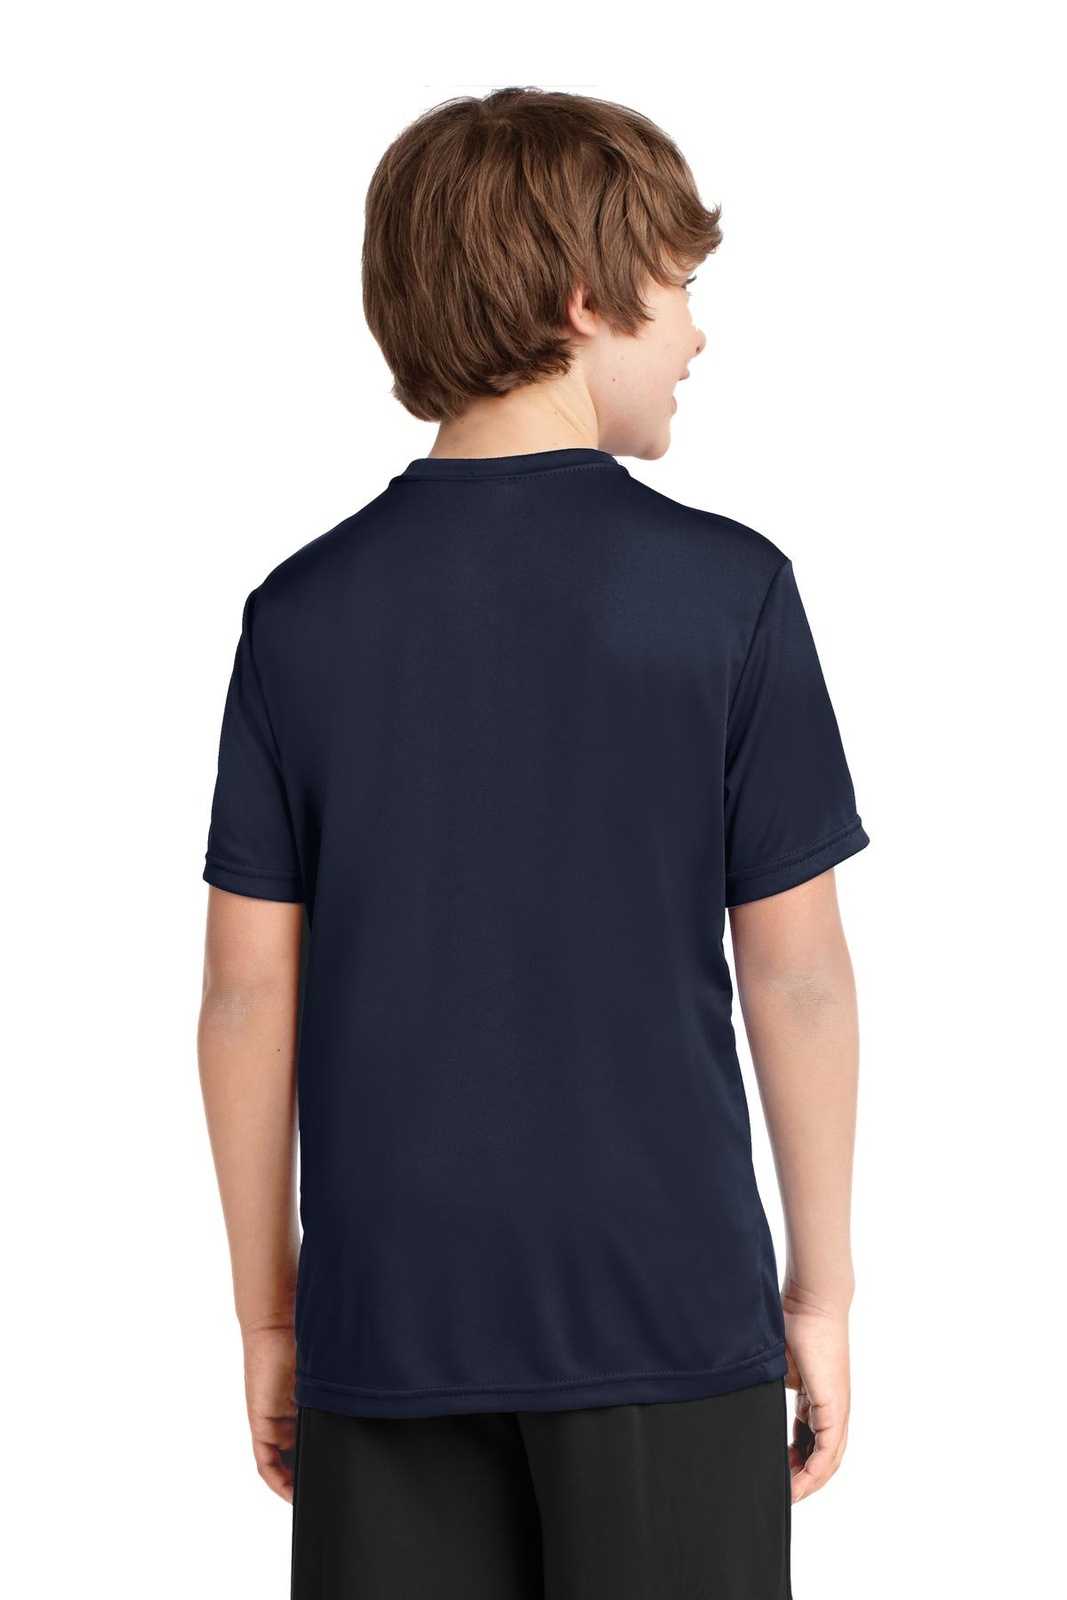 Port &amp; Company PC380Y Youth Performance Tee - Deep Navy - HIT a Double - 2